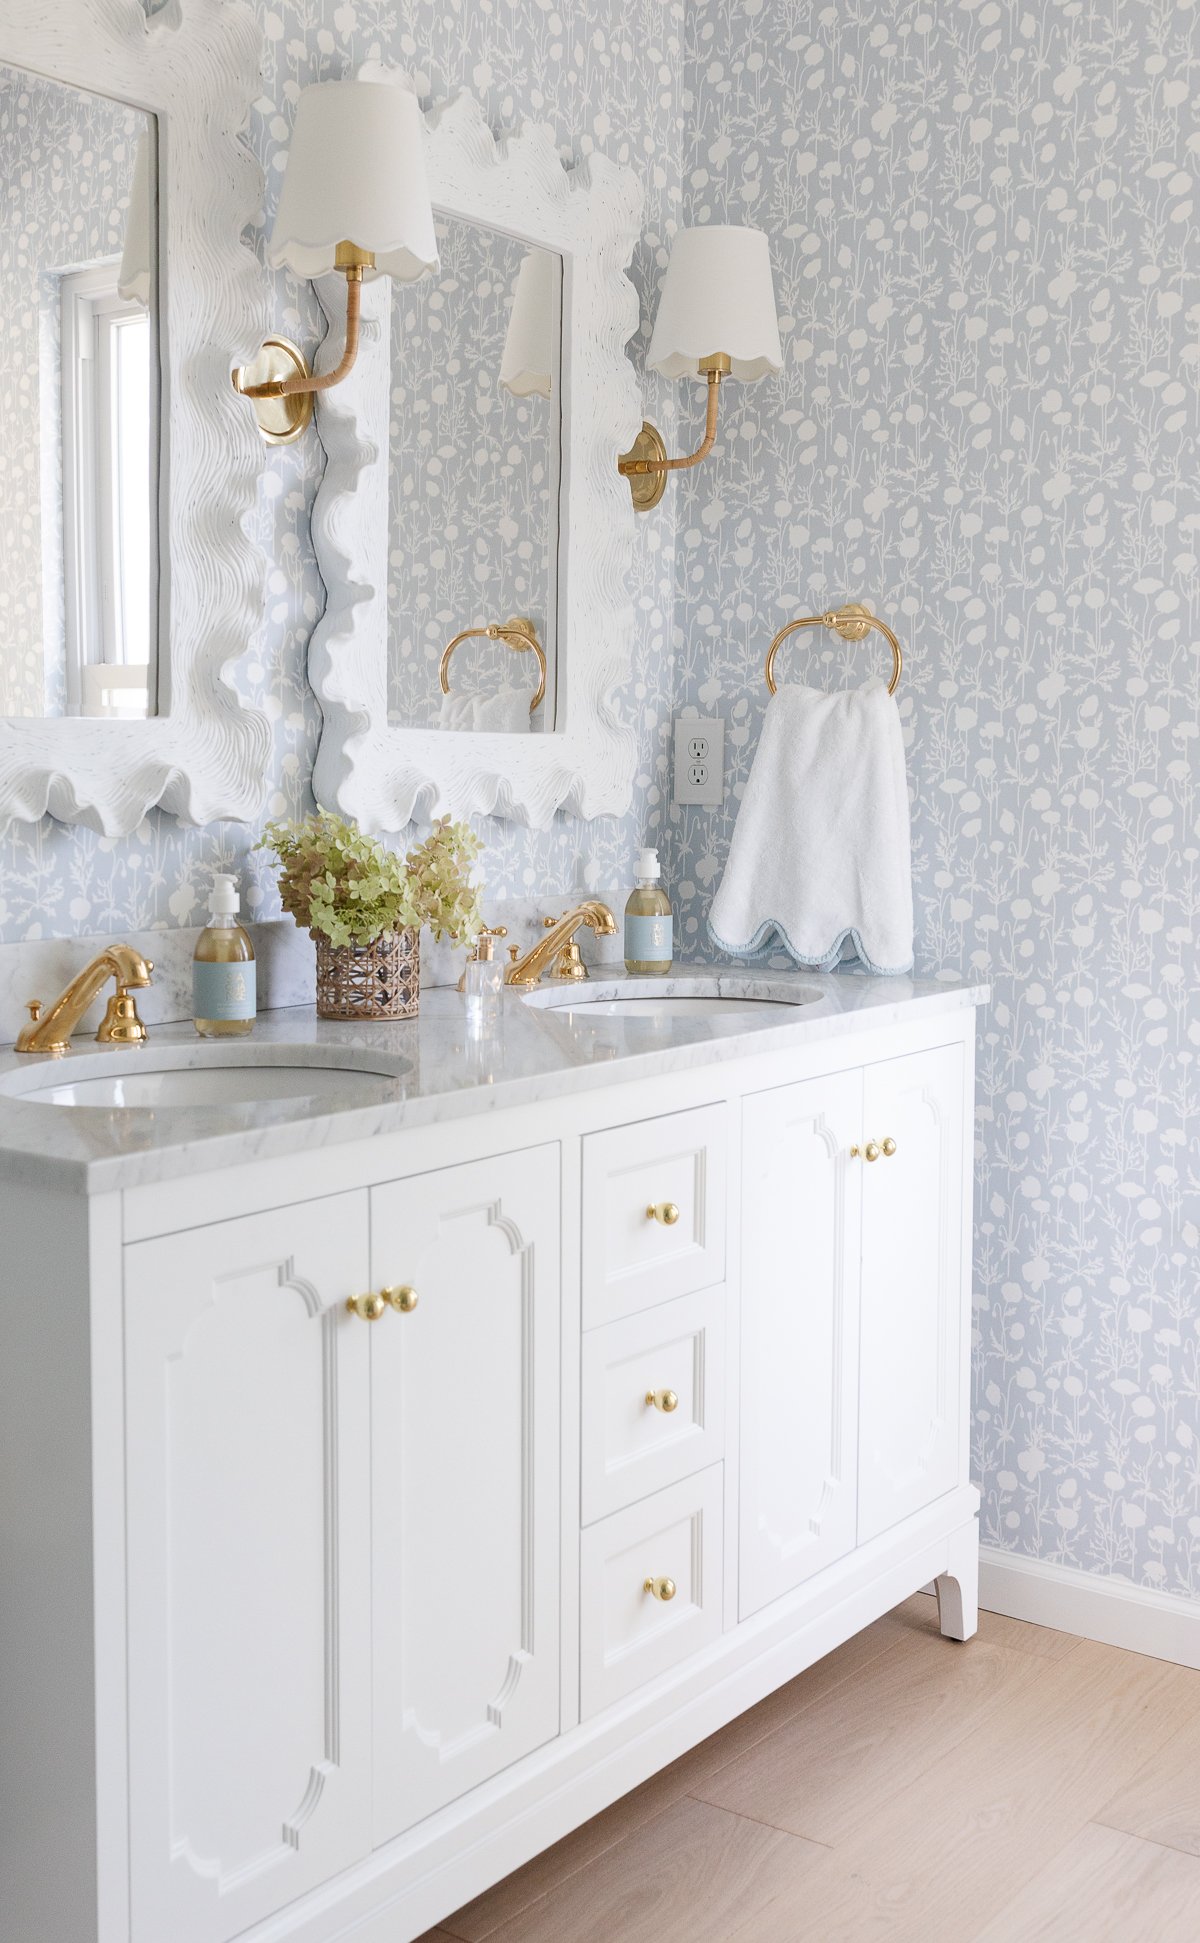 A soft blue and white wallpapered bathroom with a double white bathroom vanity.